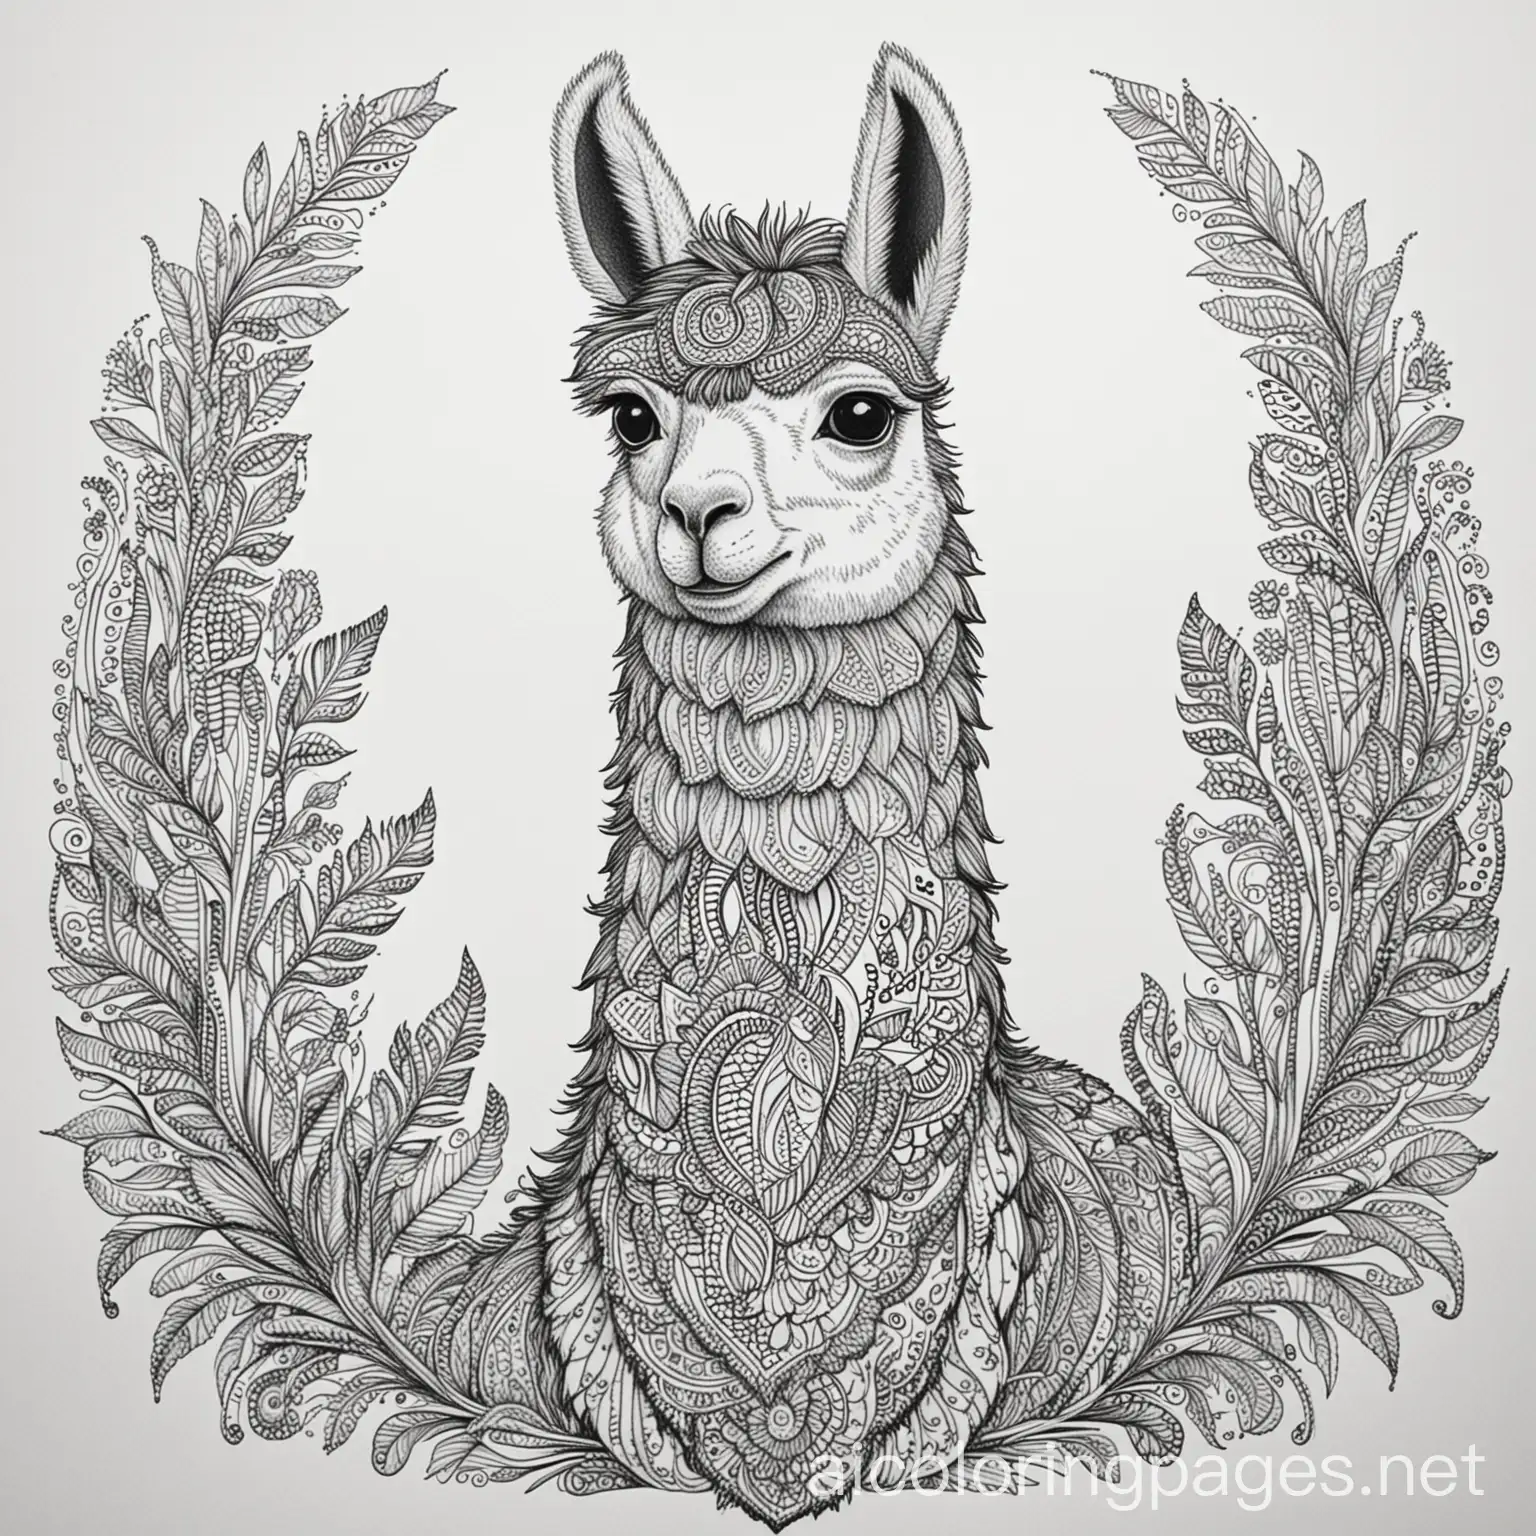 Llama-Coloring-Page-with-Paisley-Pattern-for-Kids